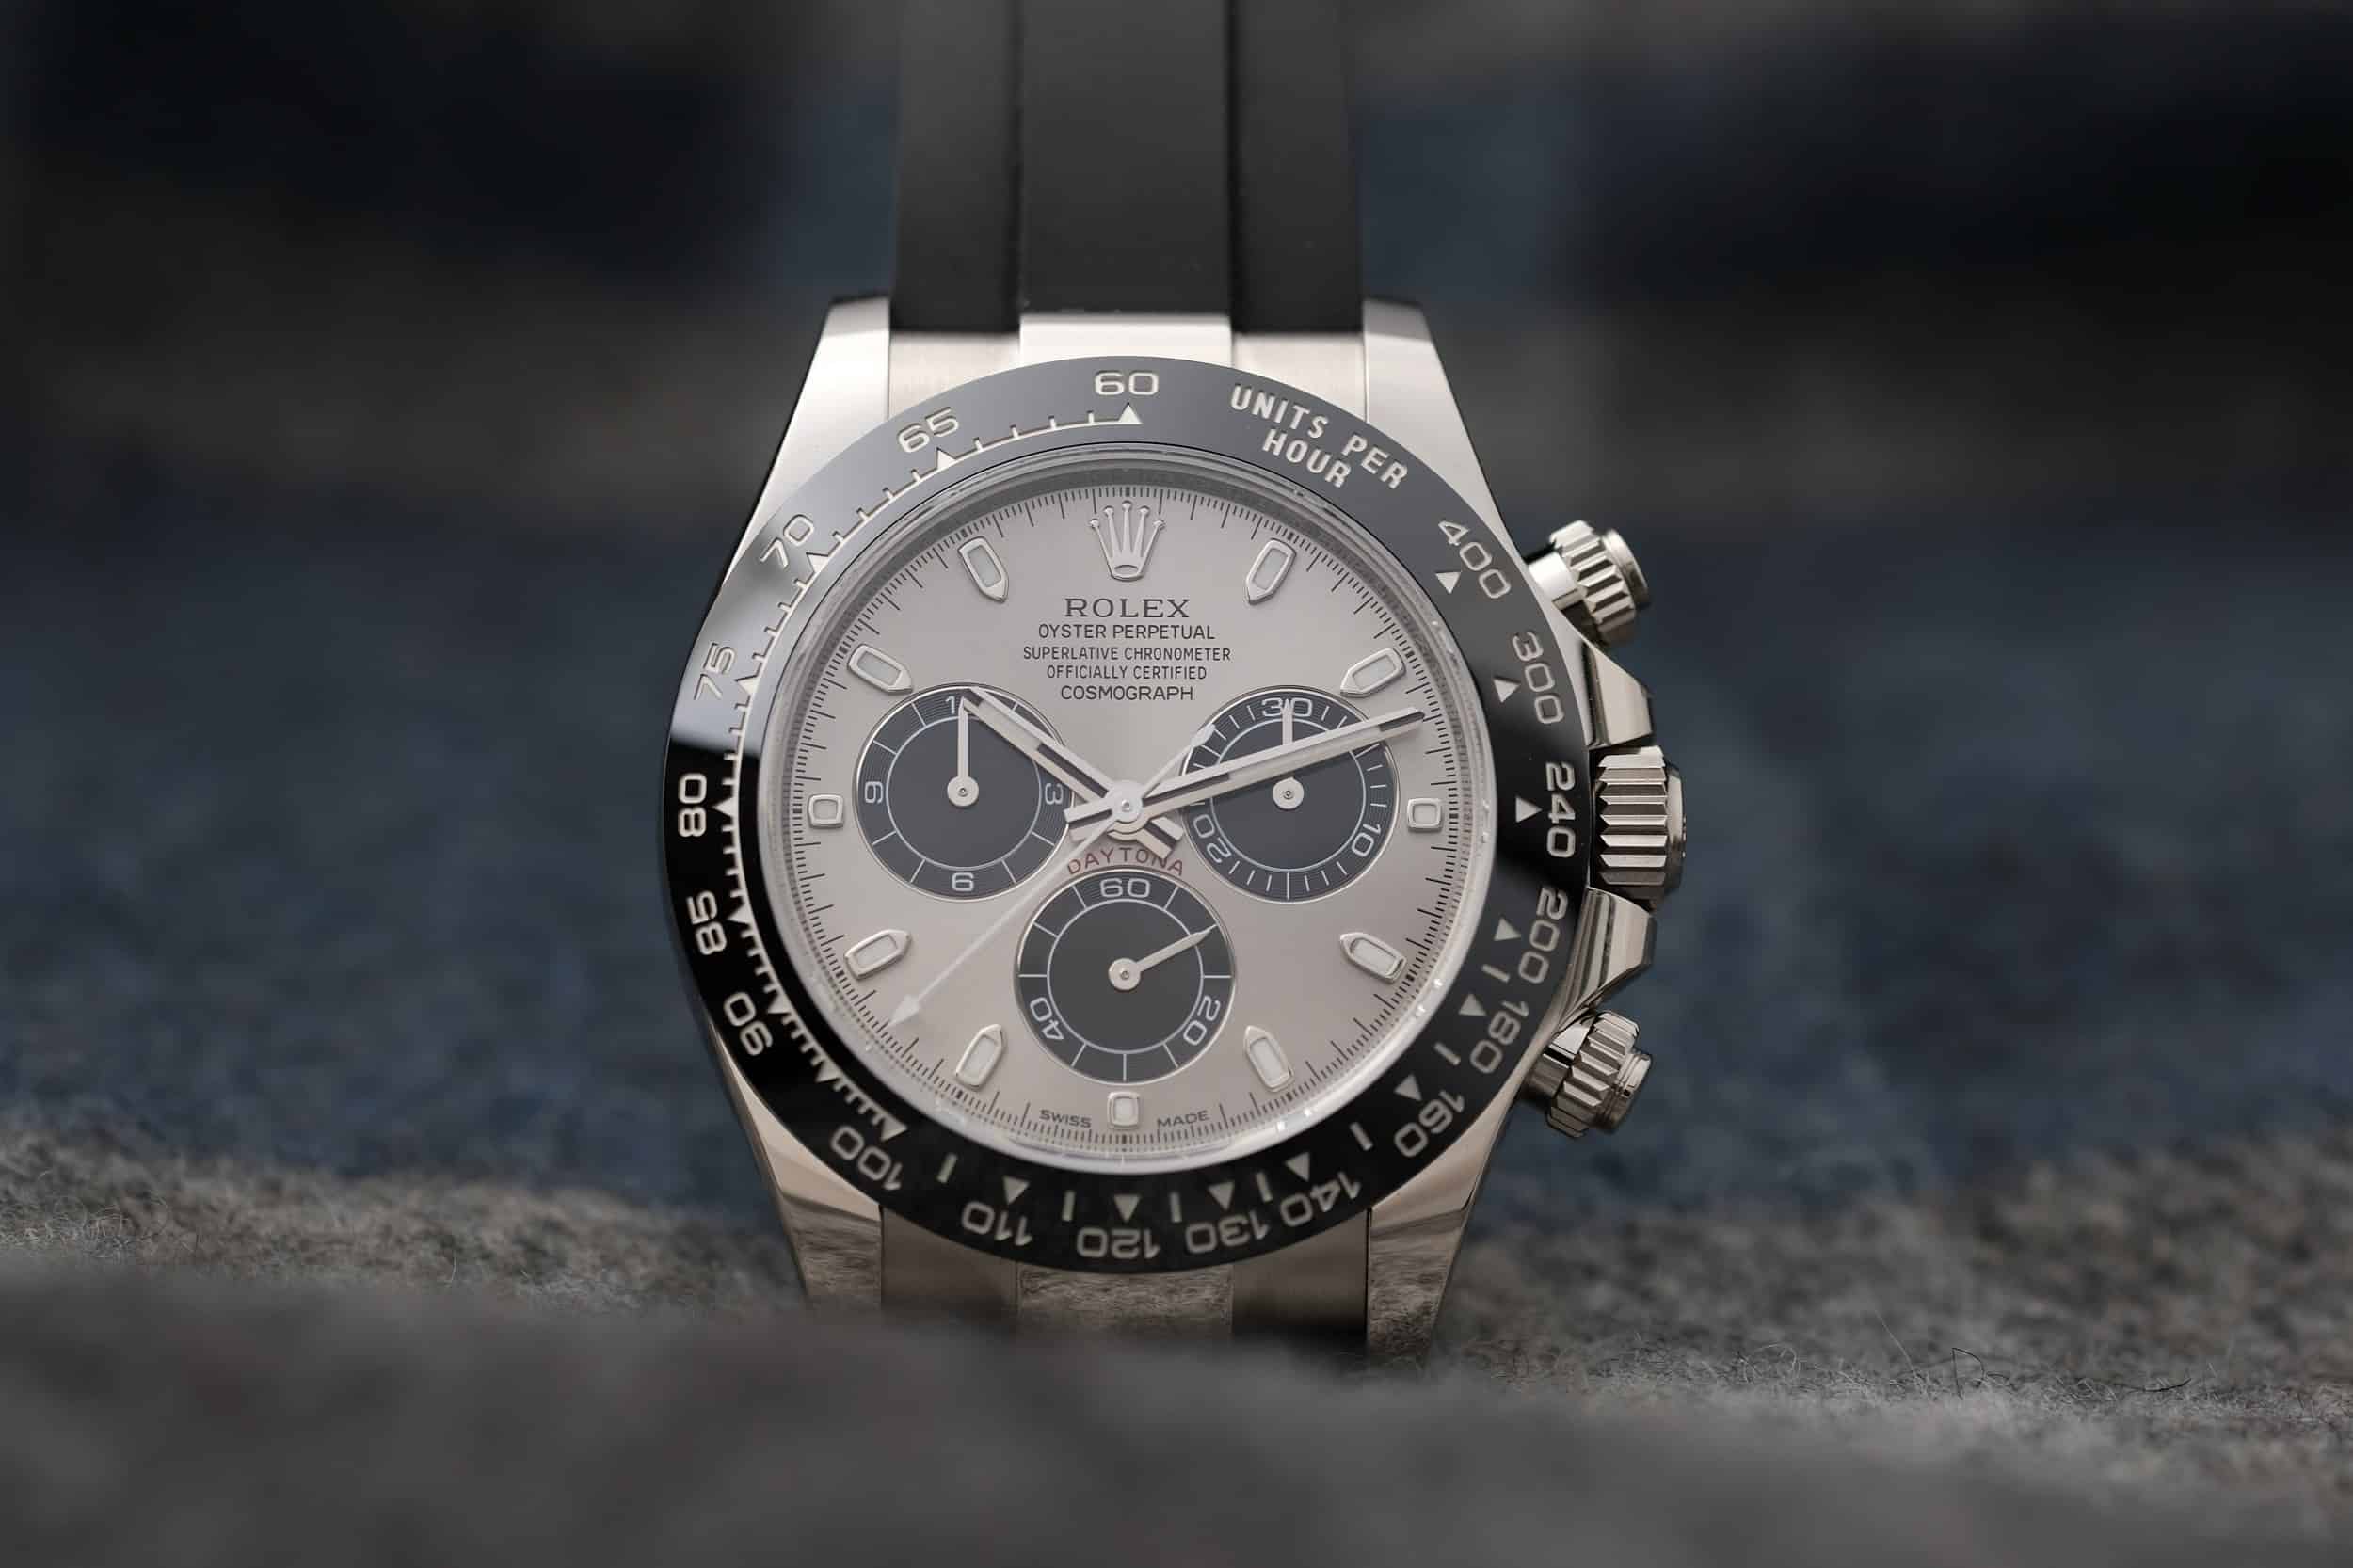 Rolex Oyster Perpetual Daytona – An in depth look at this timepiece made of white gold